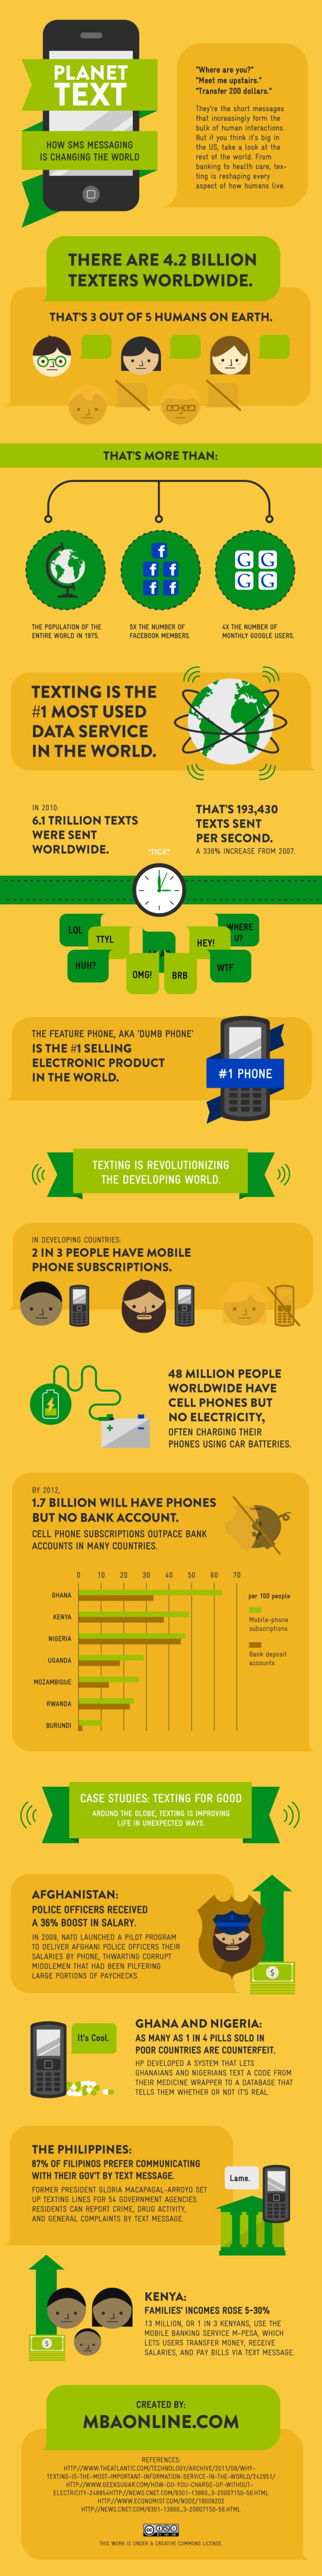 How SMS Texting is Changing the World (infographic)